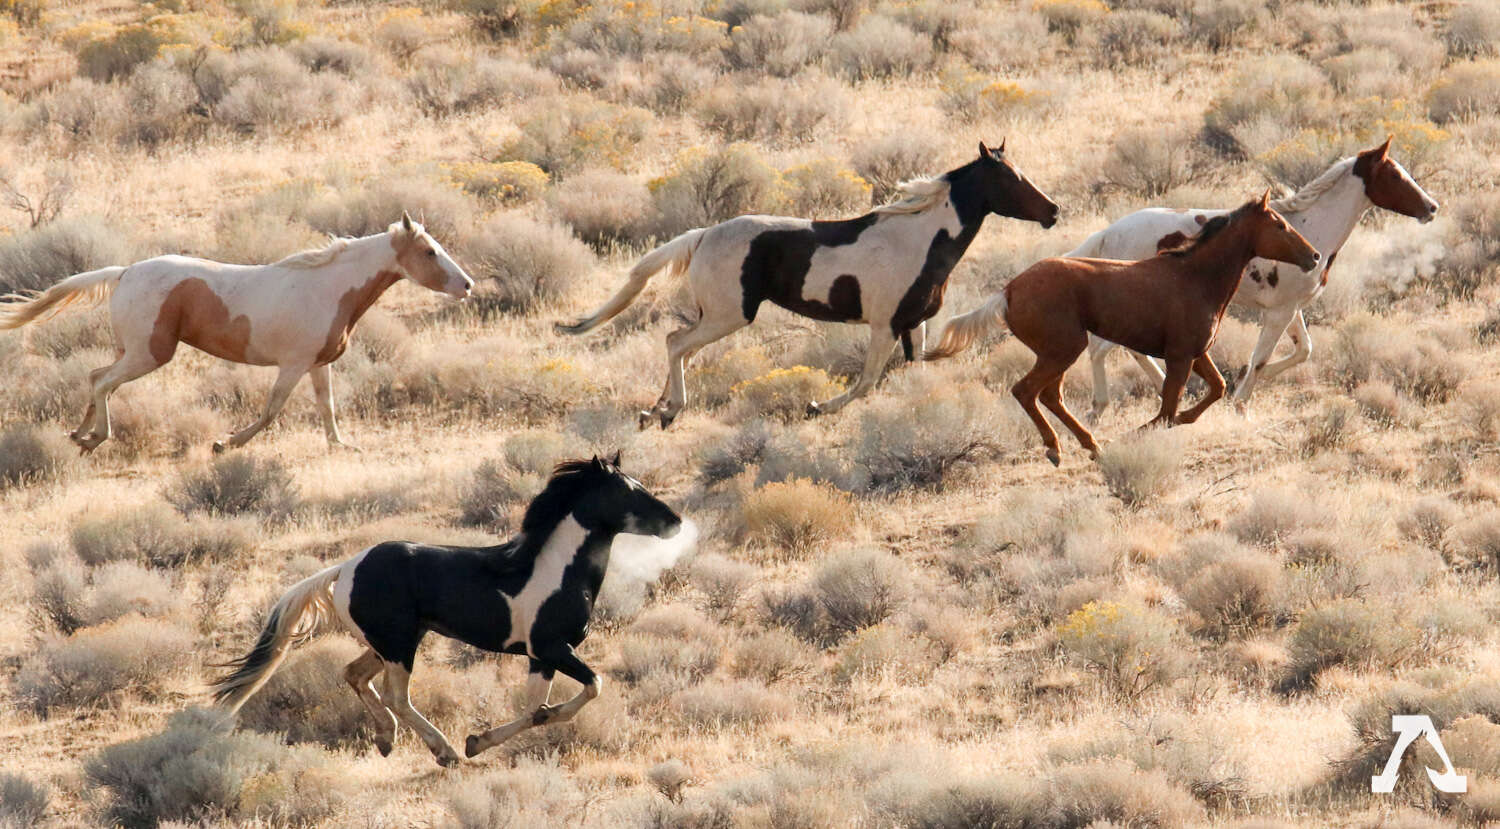 Wild horse in Oregon with horse-shaped markings